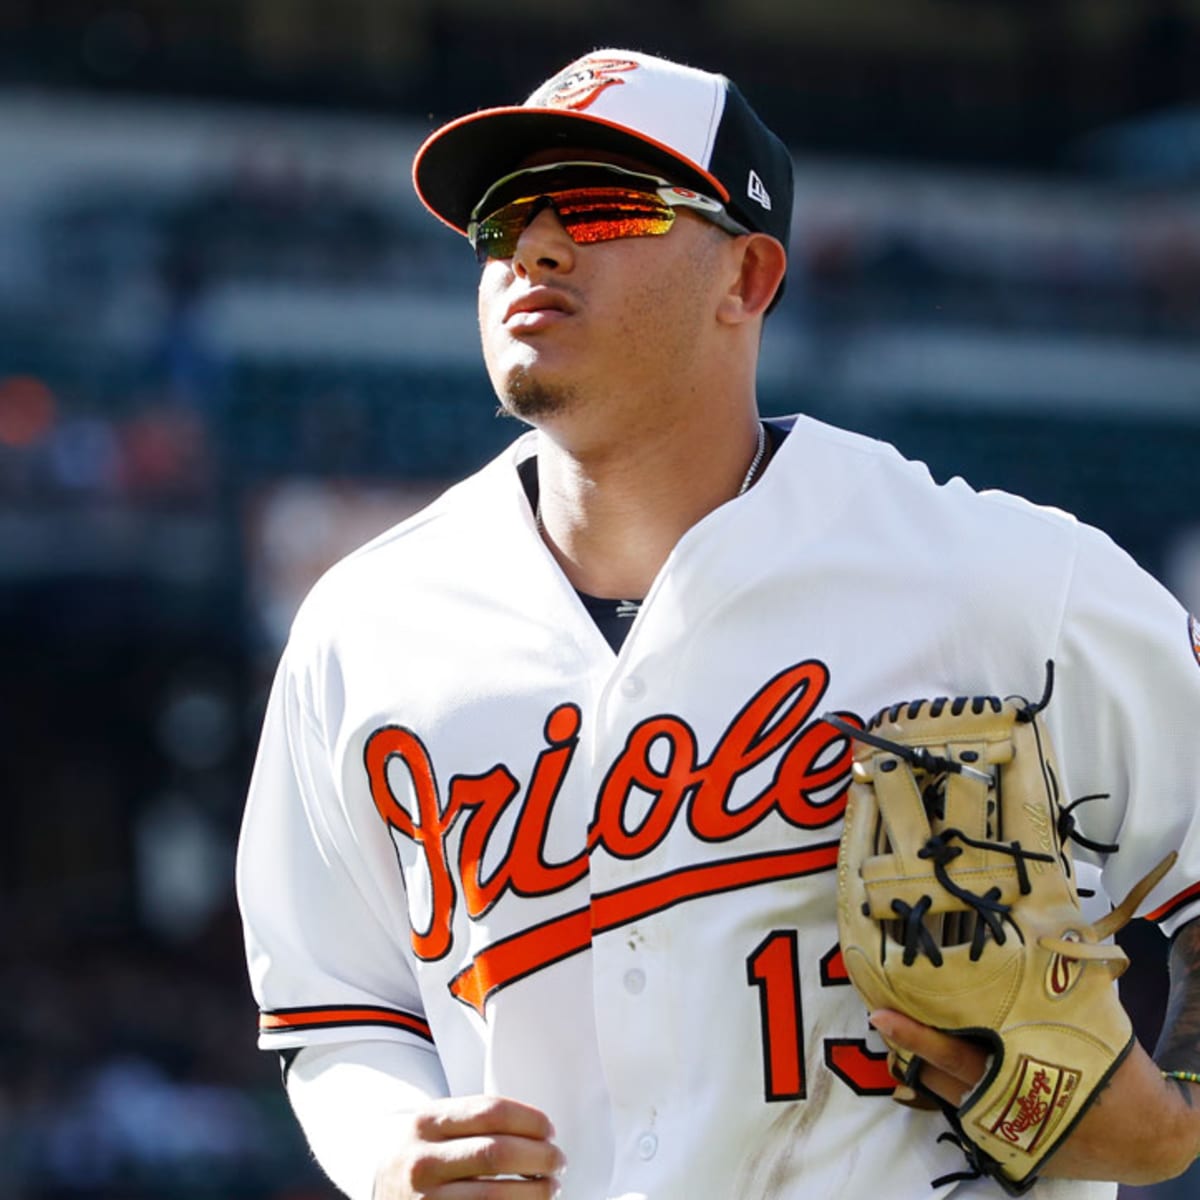 MLB All-Star Game: Dodgers excited for arrival of Manny Machado